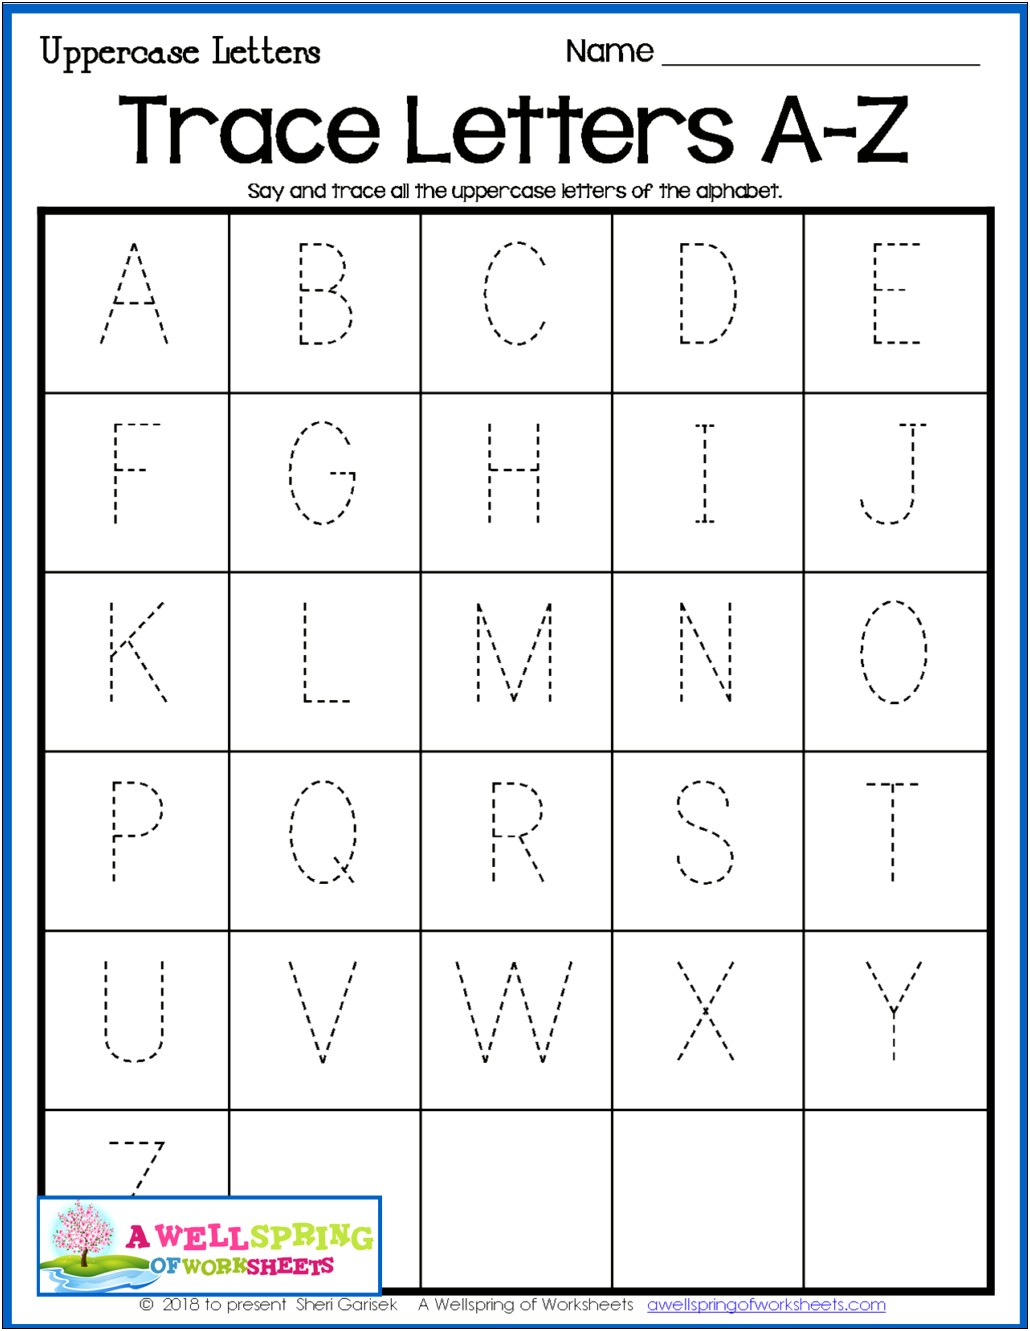 cut-out-alphabet-template-free-printable-resume-example-gallery